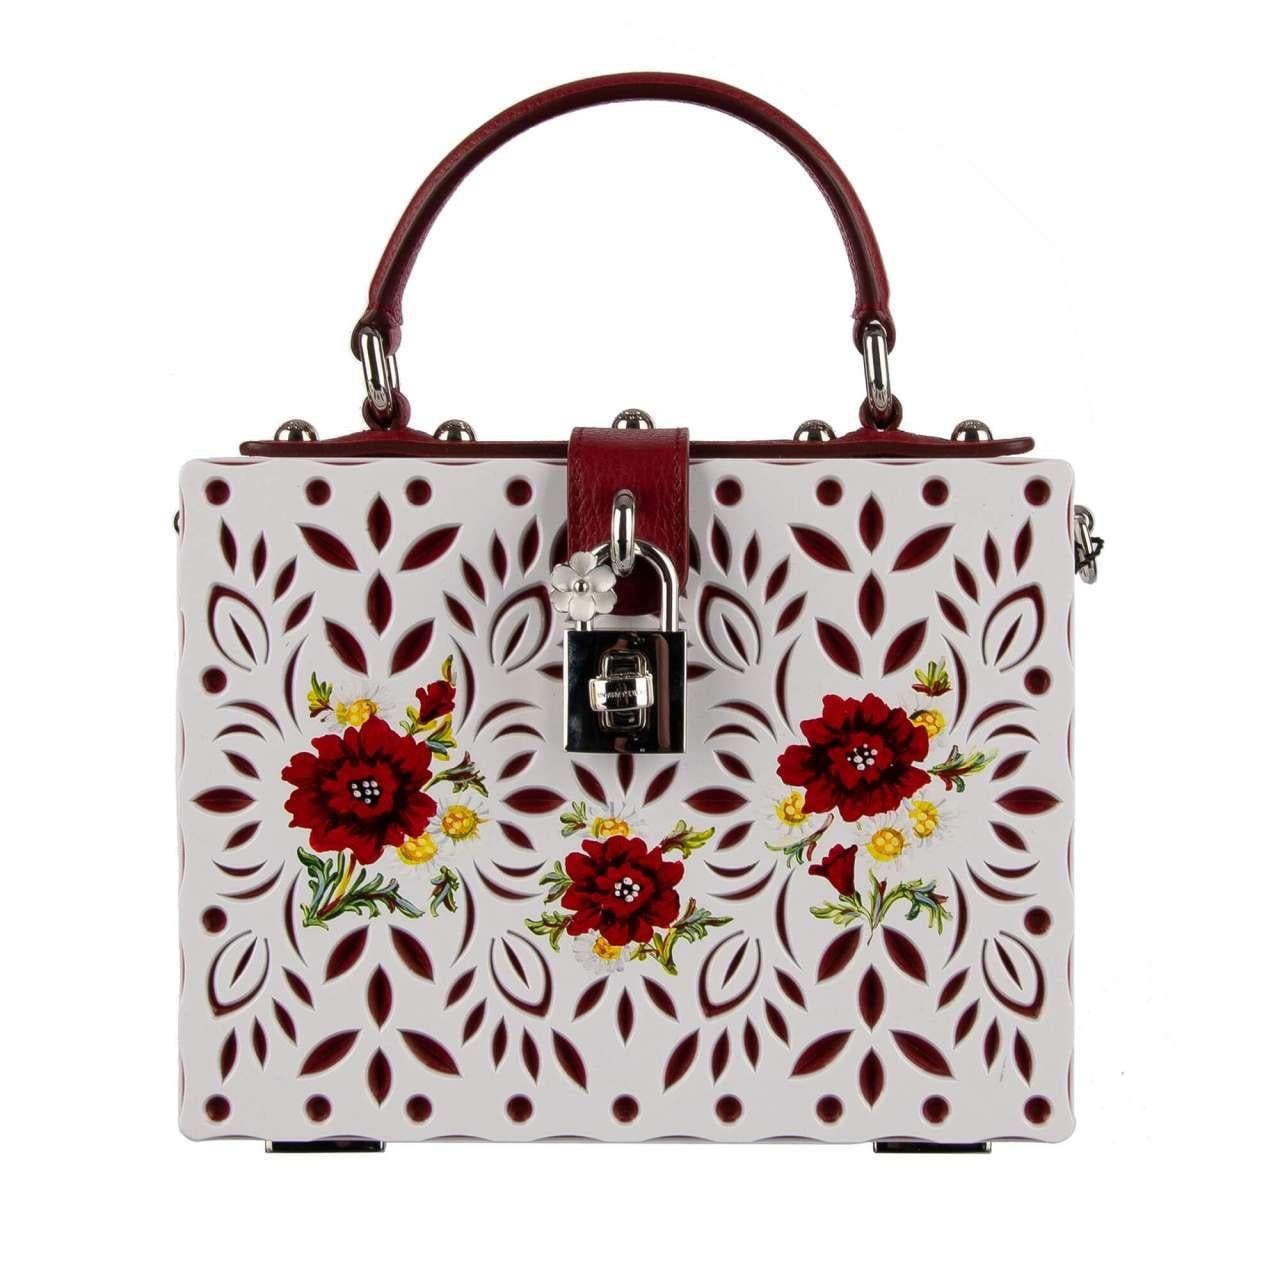 - Hand painted poppy and chamomile plexiglas bag / shoulder bag / clutch DOLCE BOX with floral carved texture and decorative padlock with flower by DOLCE & GABBANA - New with Tag, Dustbag, Authenticity Card - Material: 85% Plexiglas, 15% Calfskin -